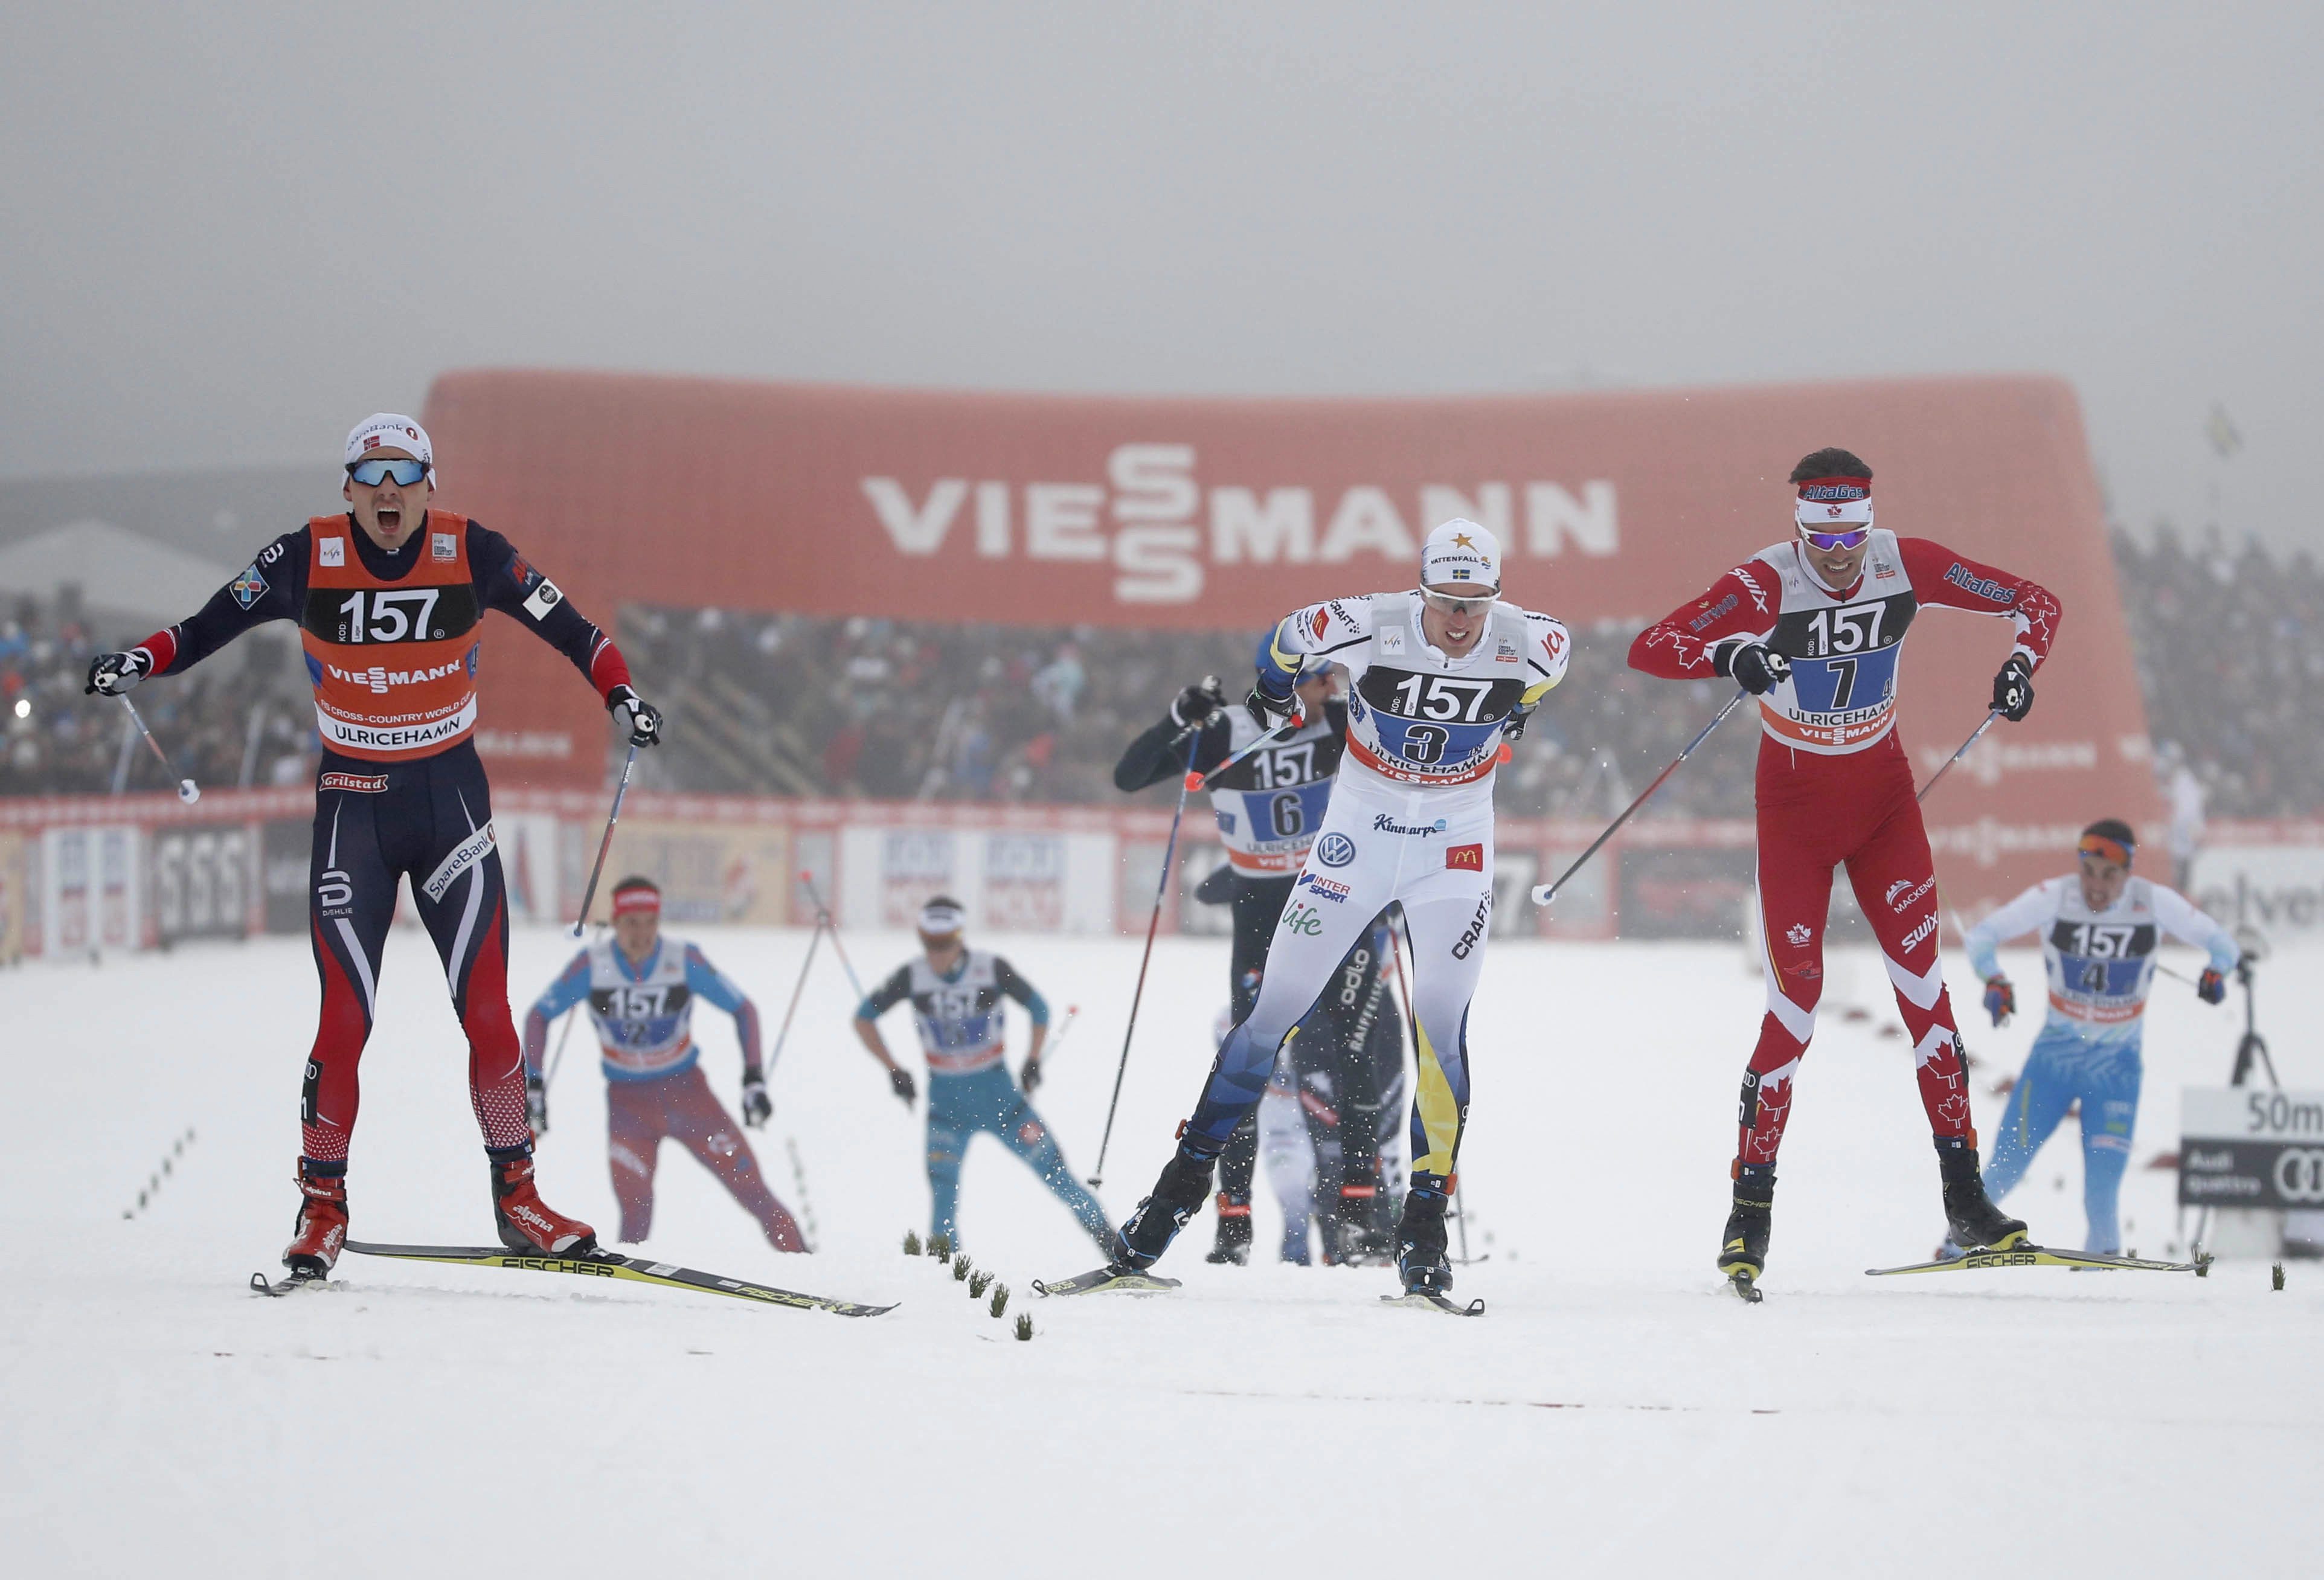 Norway's Finn Haagen Krogh, left, wins in front of Sweden's Calle Halfvarsson, centre, and Len Valjas of Canada, right, during men's relay 4x7.5 km competition at the FIS Cross Country skiing World Cup event in Ulricehamn, Sweden, Sunday Jan. 22, 2017. (Adam Ihse / TT via AP)